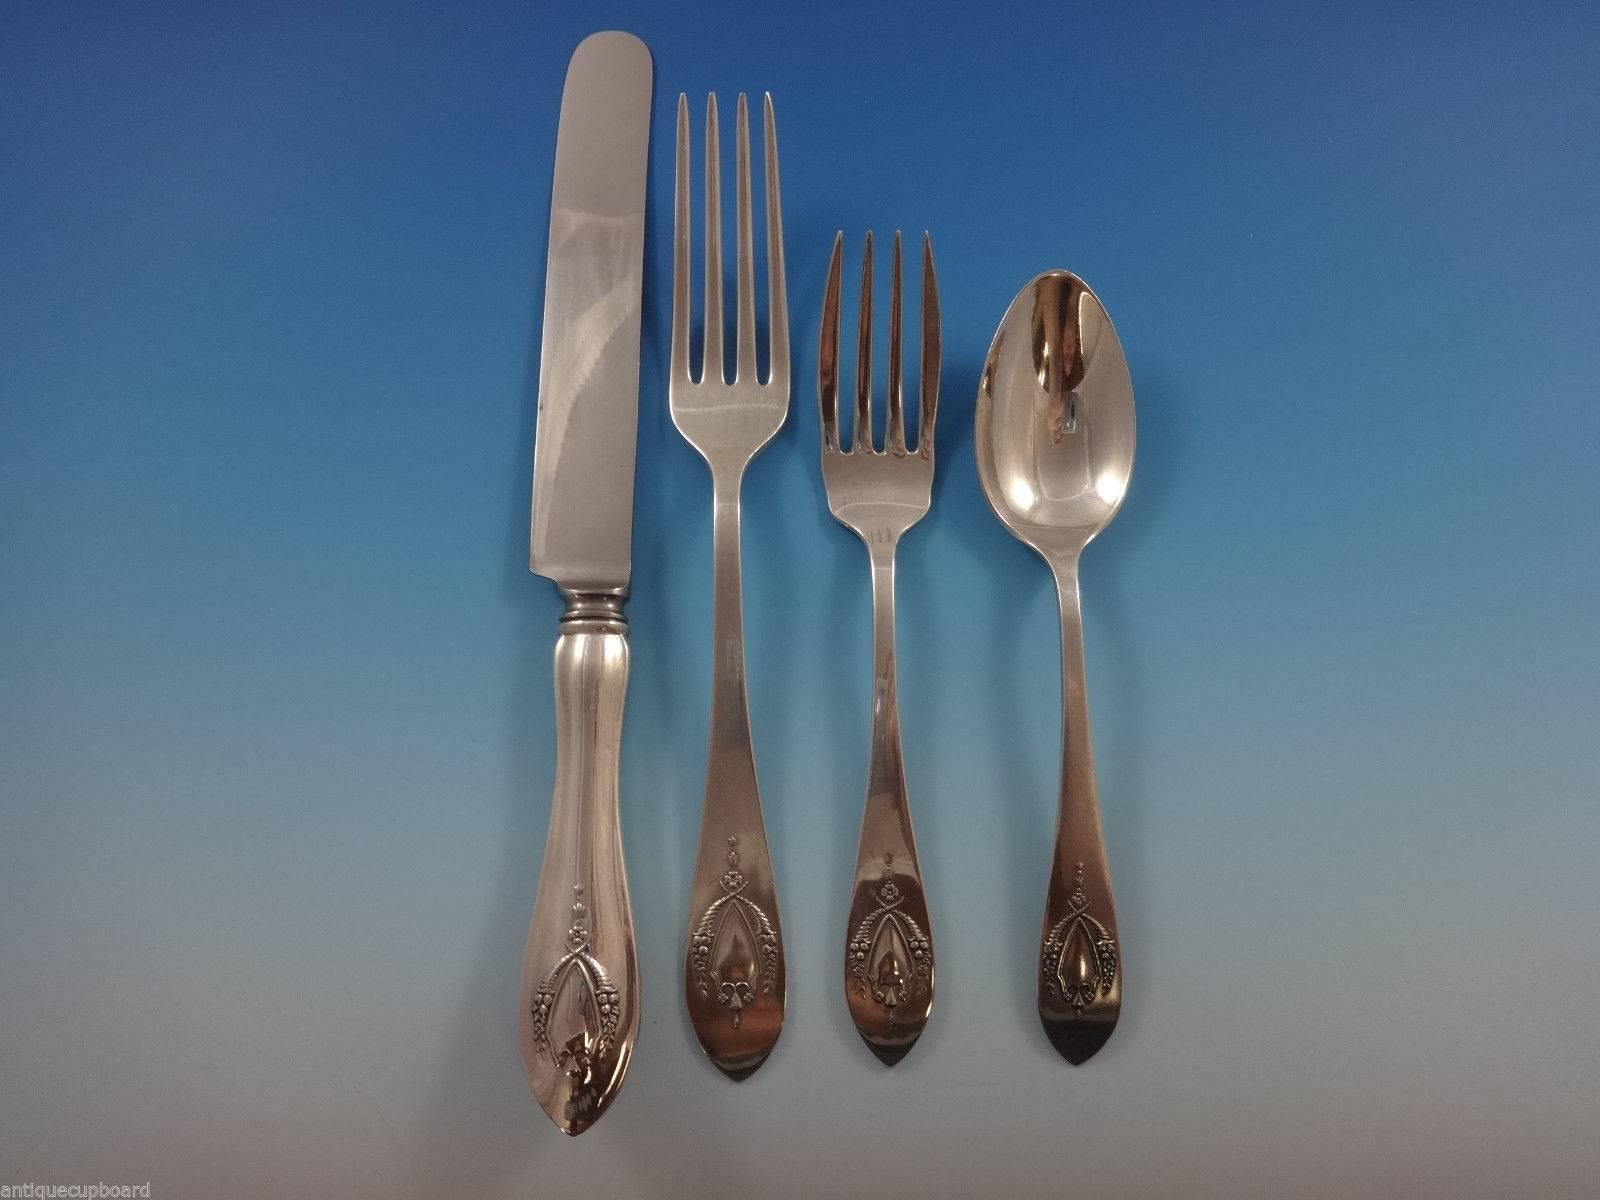 Mount Vernon by Lunt sterling silver flatware set of 32 pieces. This set includes:

Measure: Eight knives, 8 1/2